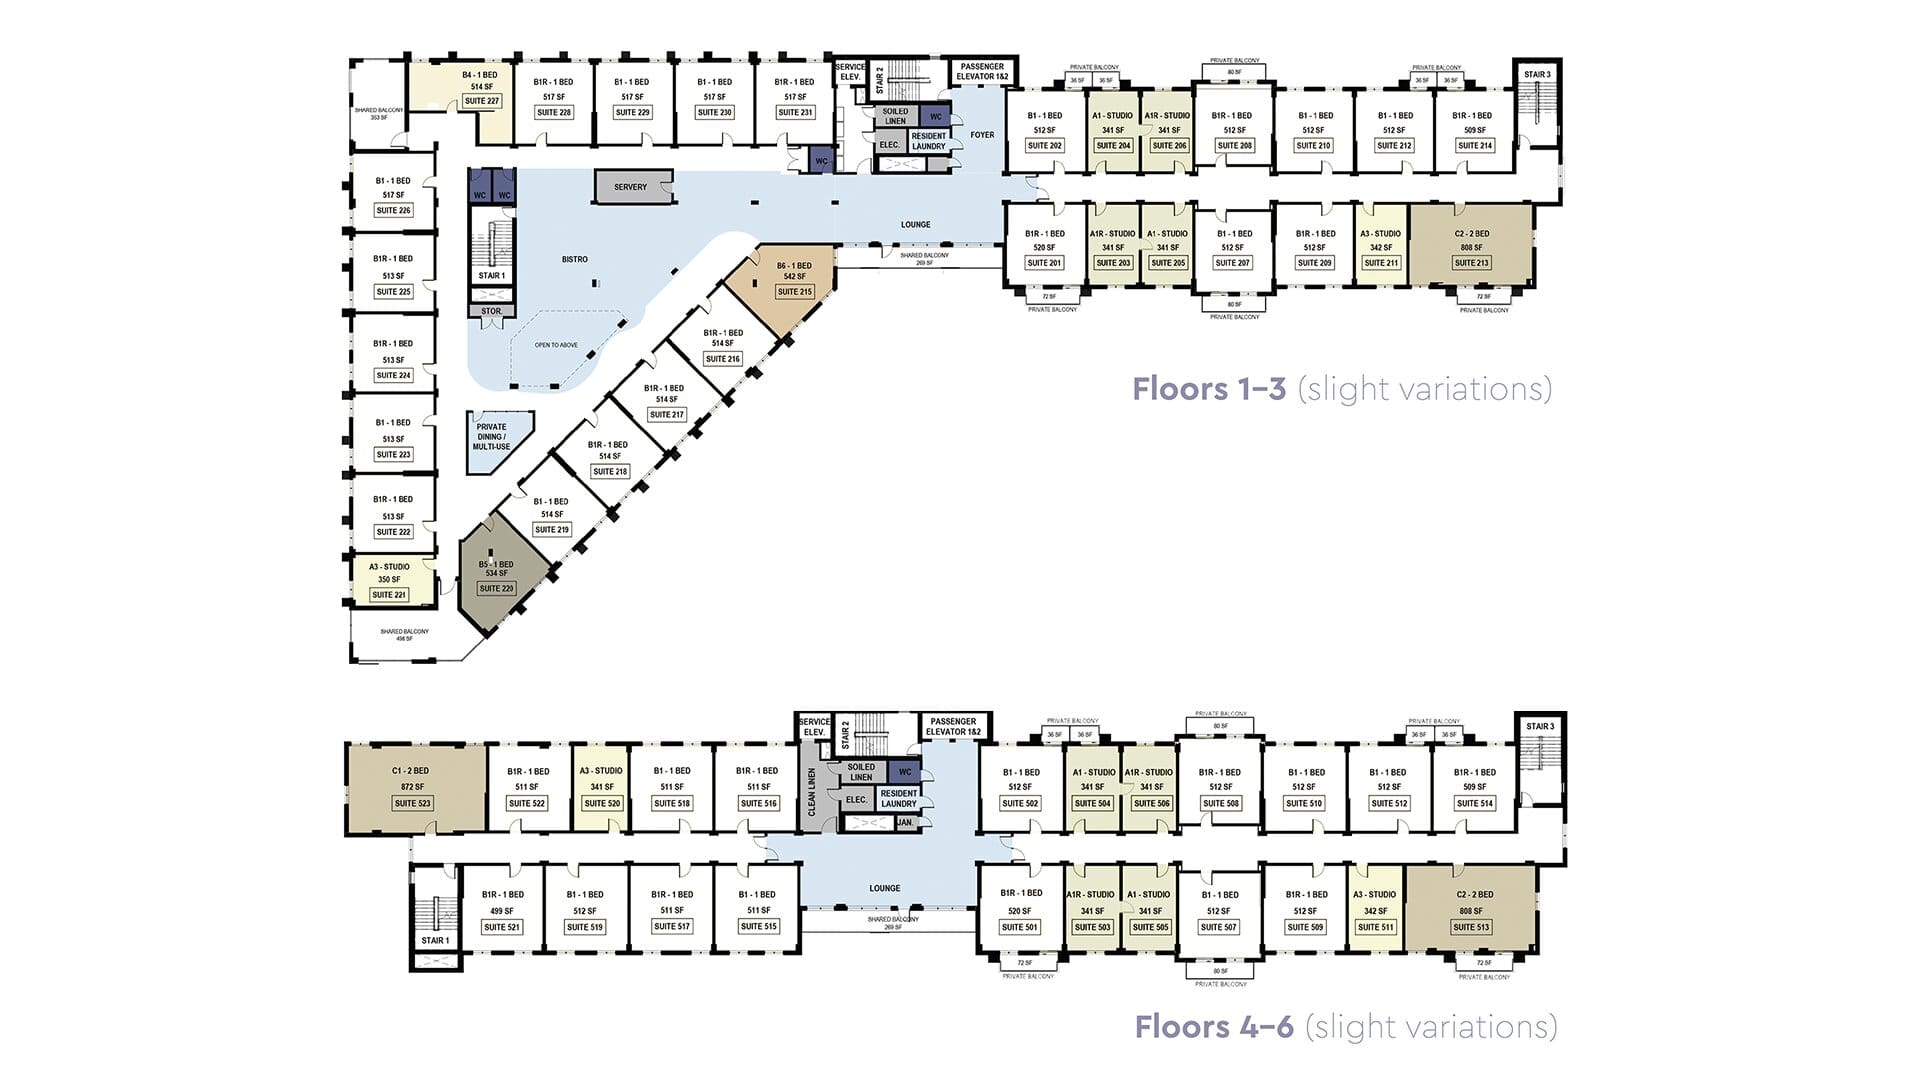 The floor plan of the first three floors of Aster Gardens